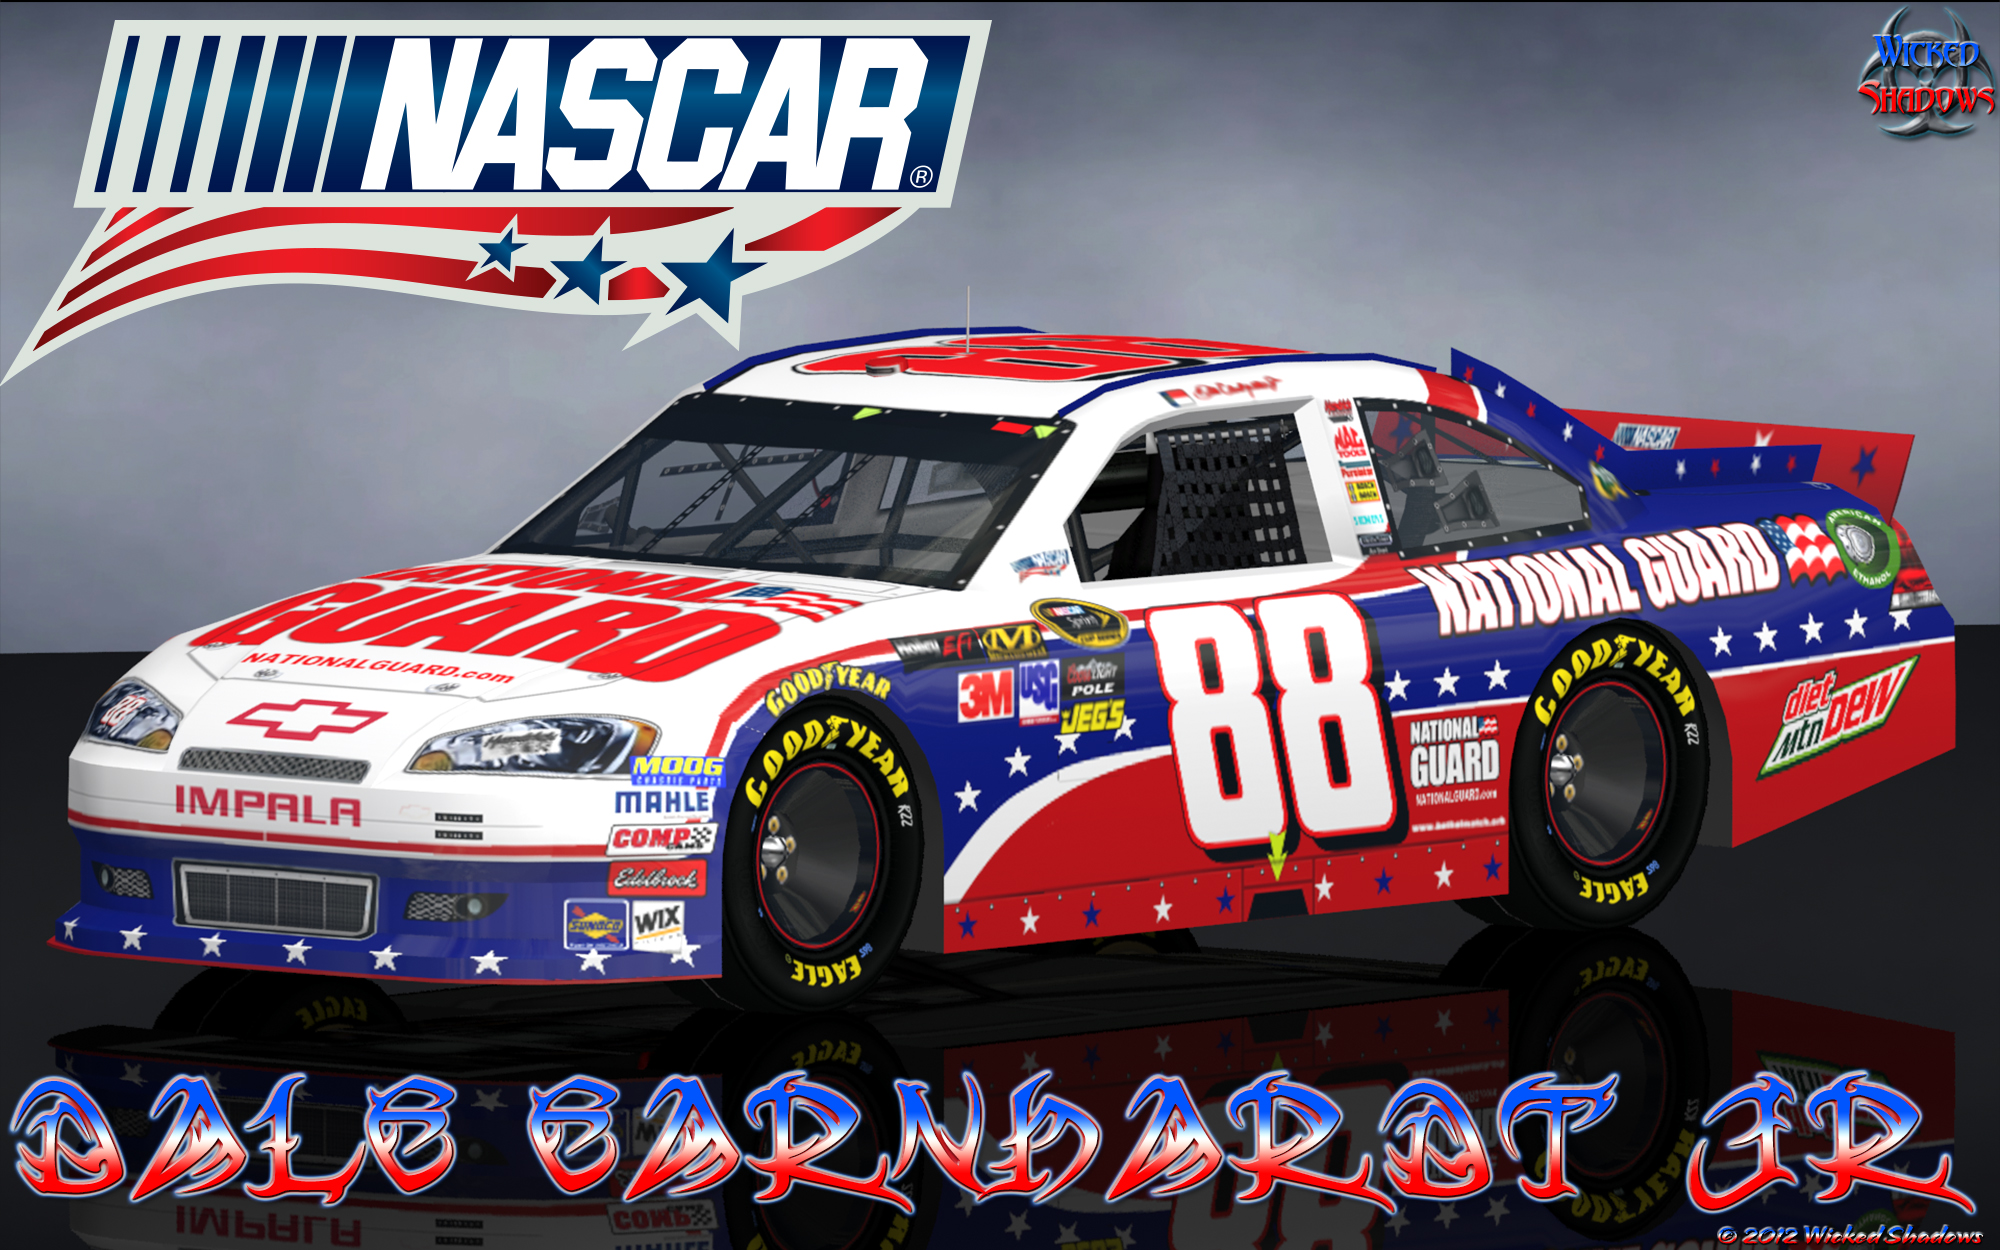 Jr Nascar Unites National Guard Wallpaper Is A Tribute To Our Troops